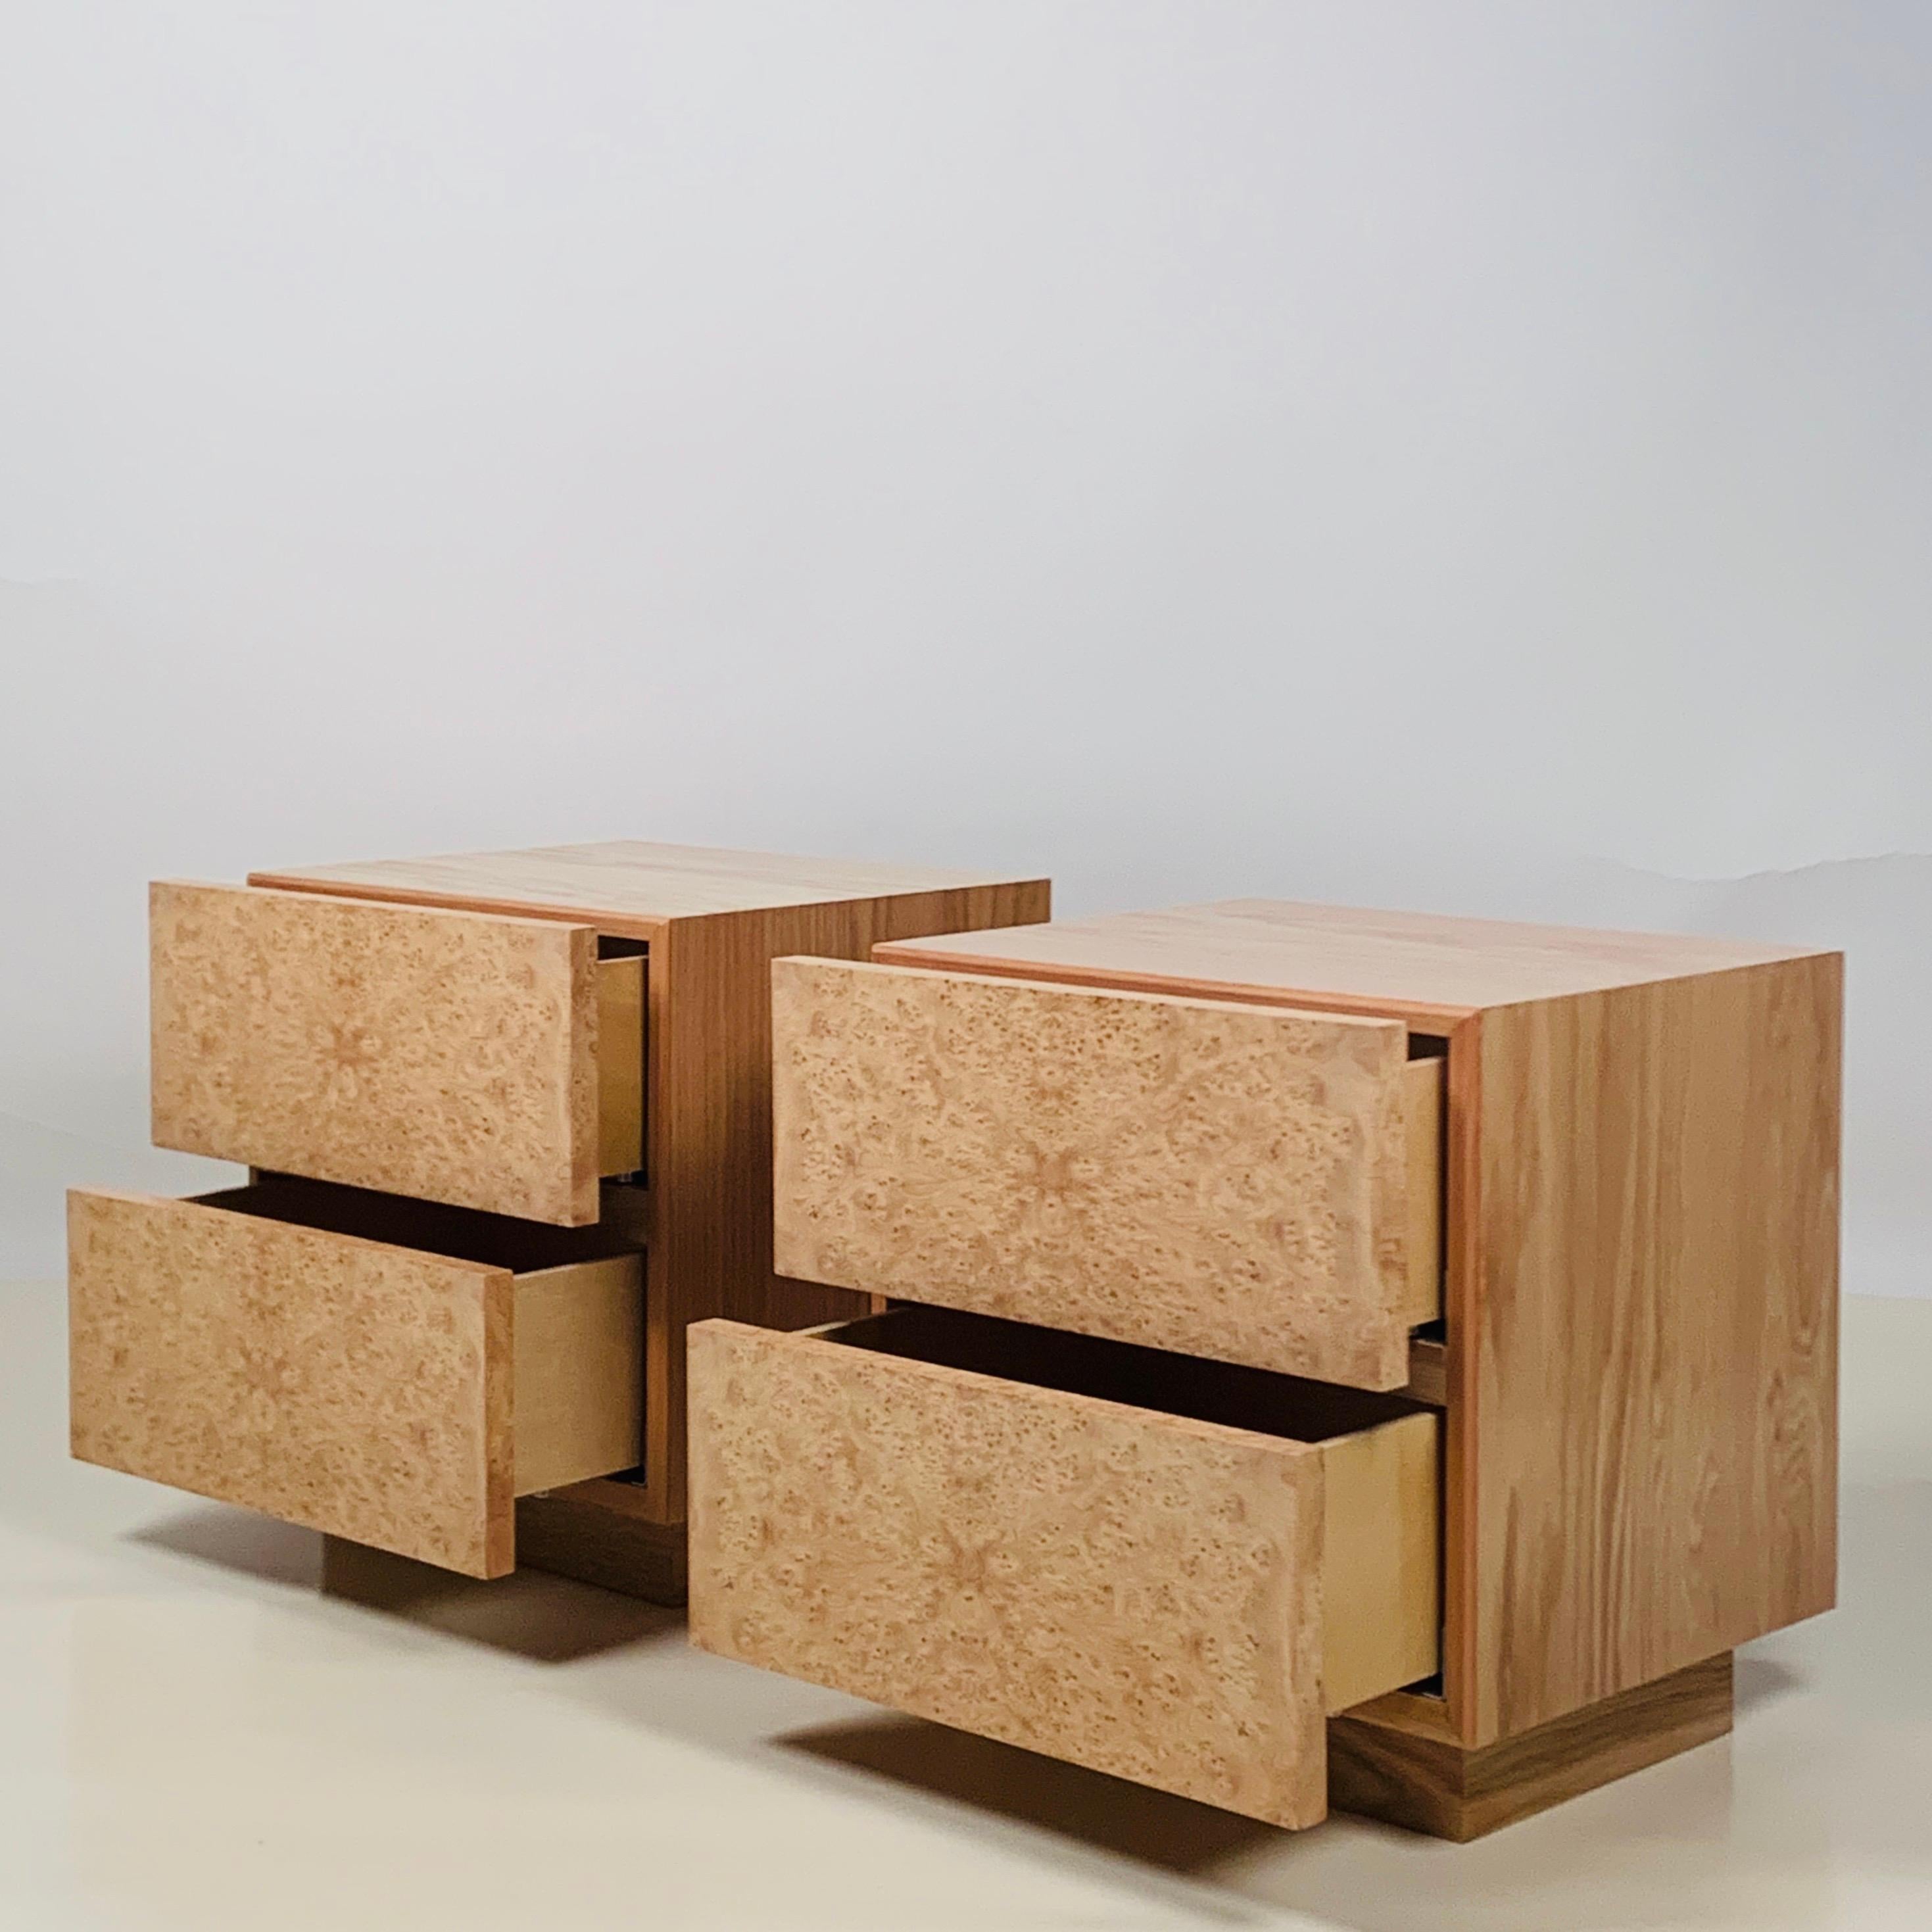 American Pair of Minimalist 'Amboine' Burl Wood Nightstands by Design Frères For Sale